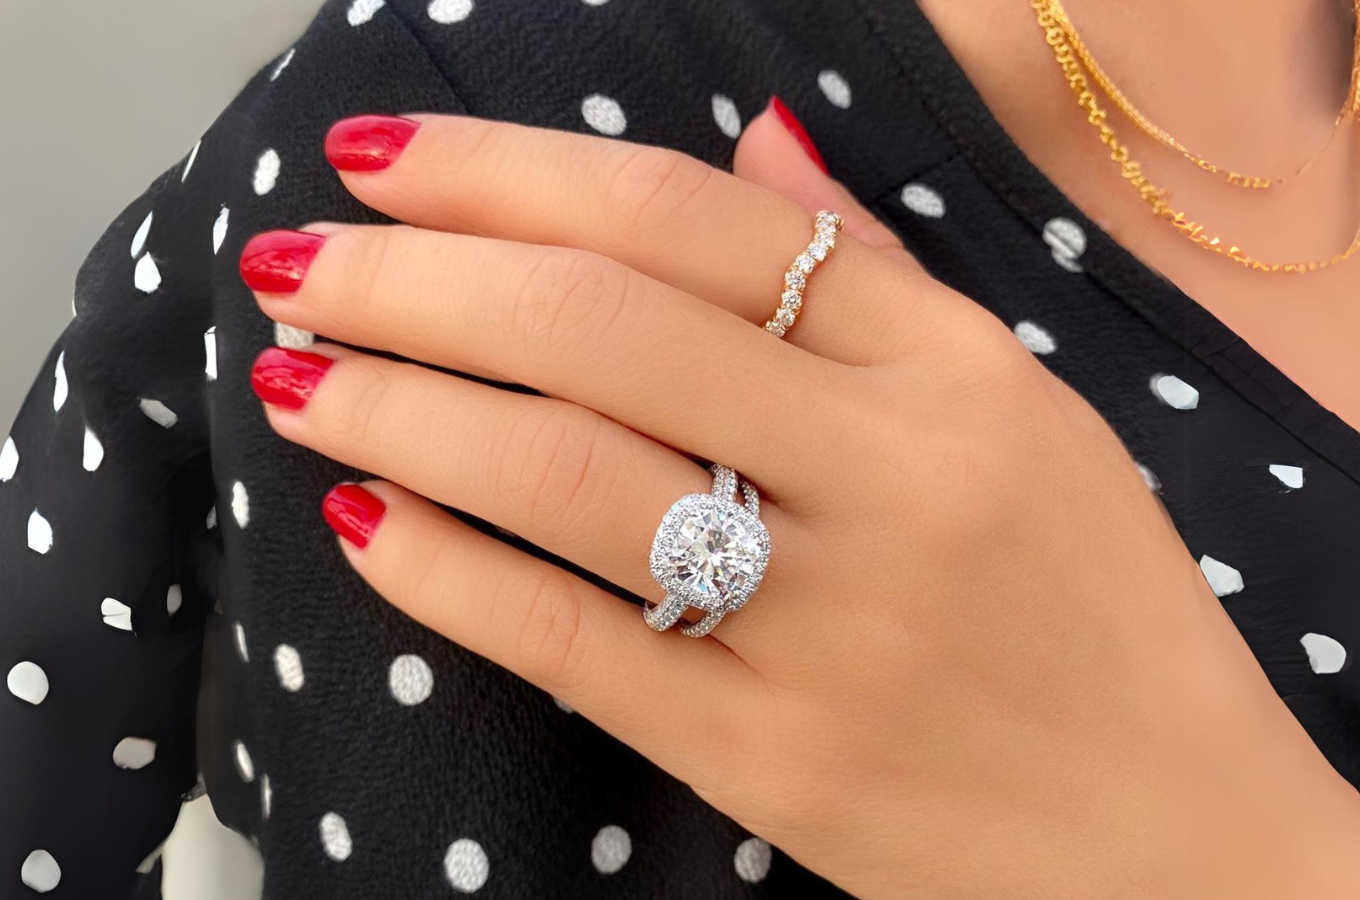 6 Tips for Designing a Unique Custom Engagement Ring